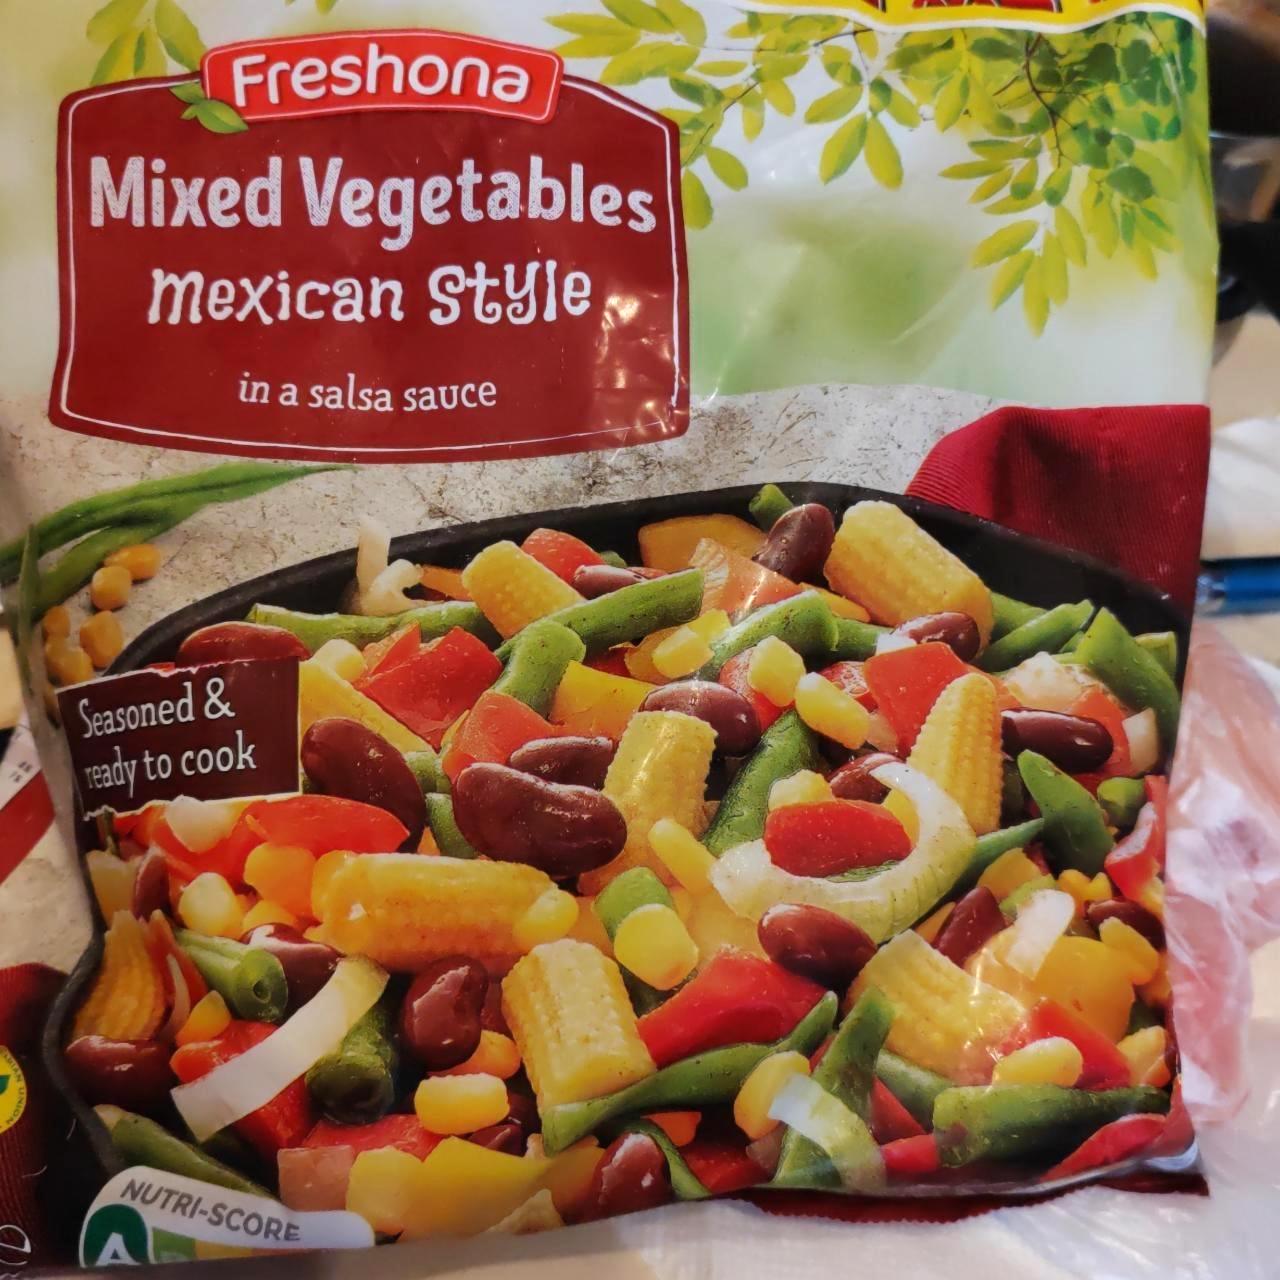 Képek - Mixed vegetables mexican style in spicy salsa Freshona